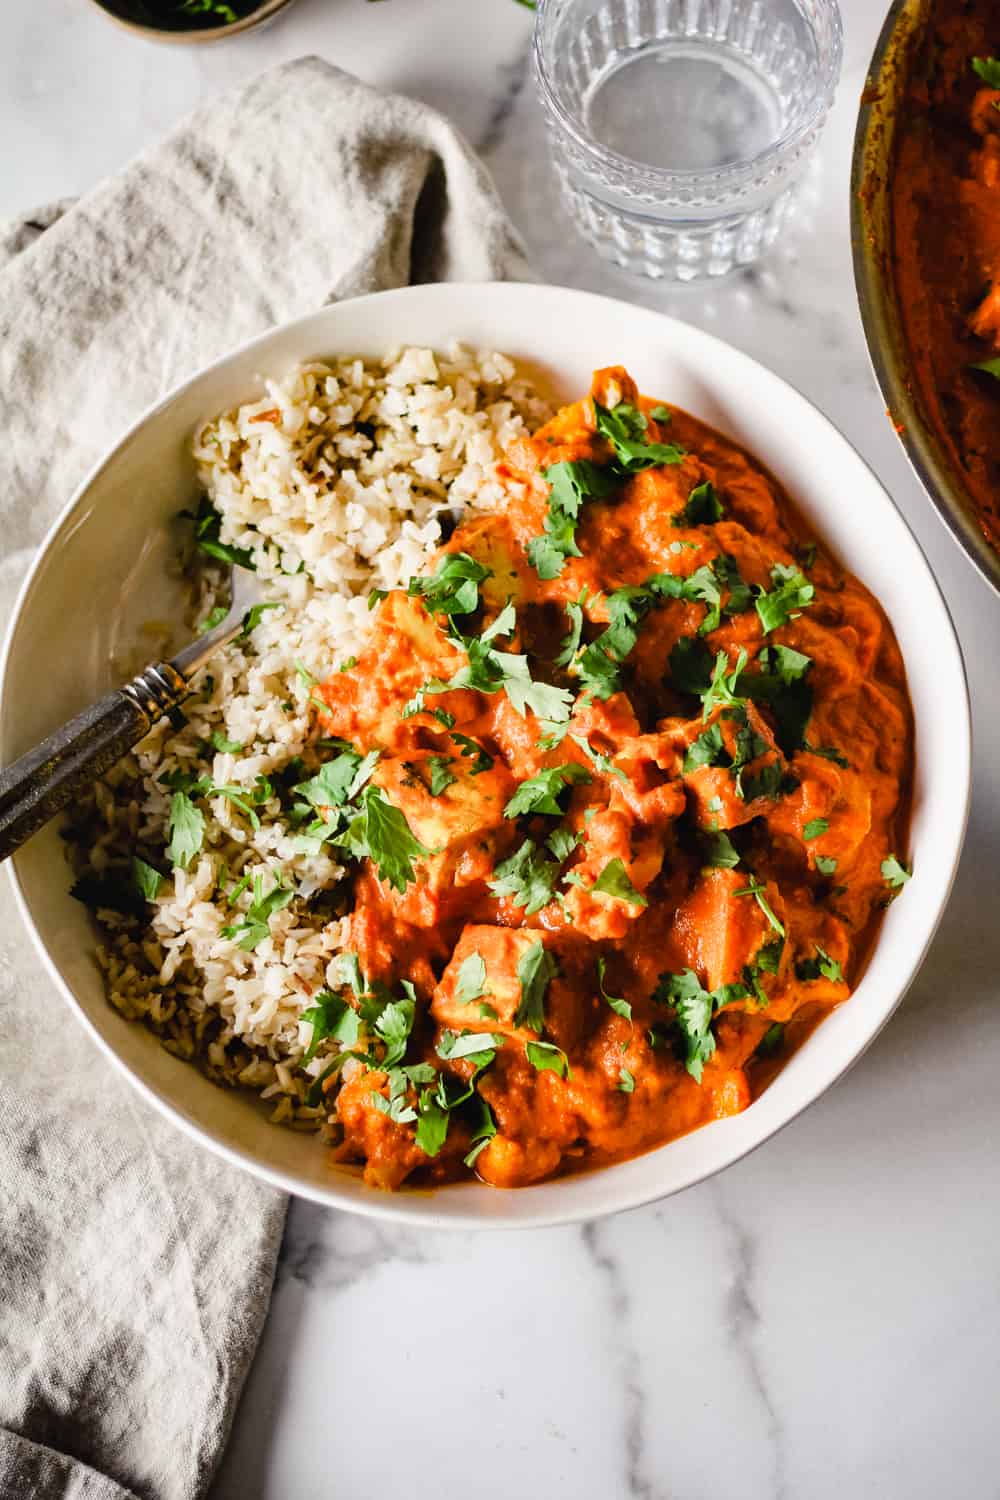 Overhead image of Vegan Tikka Masala in a white bowl with brown basmati rice and cilantro.